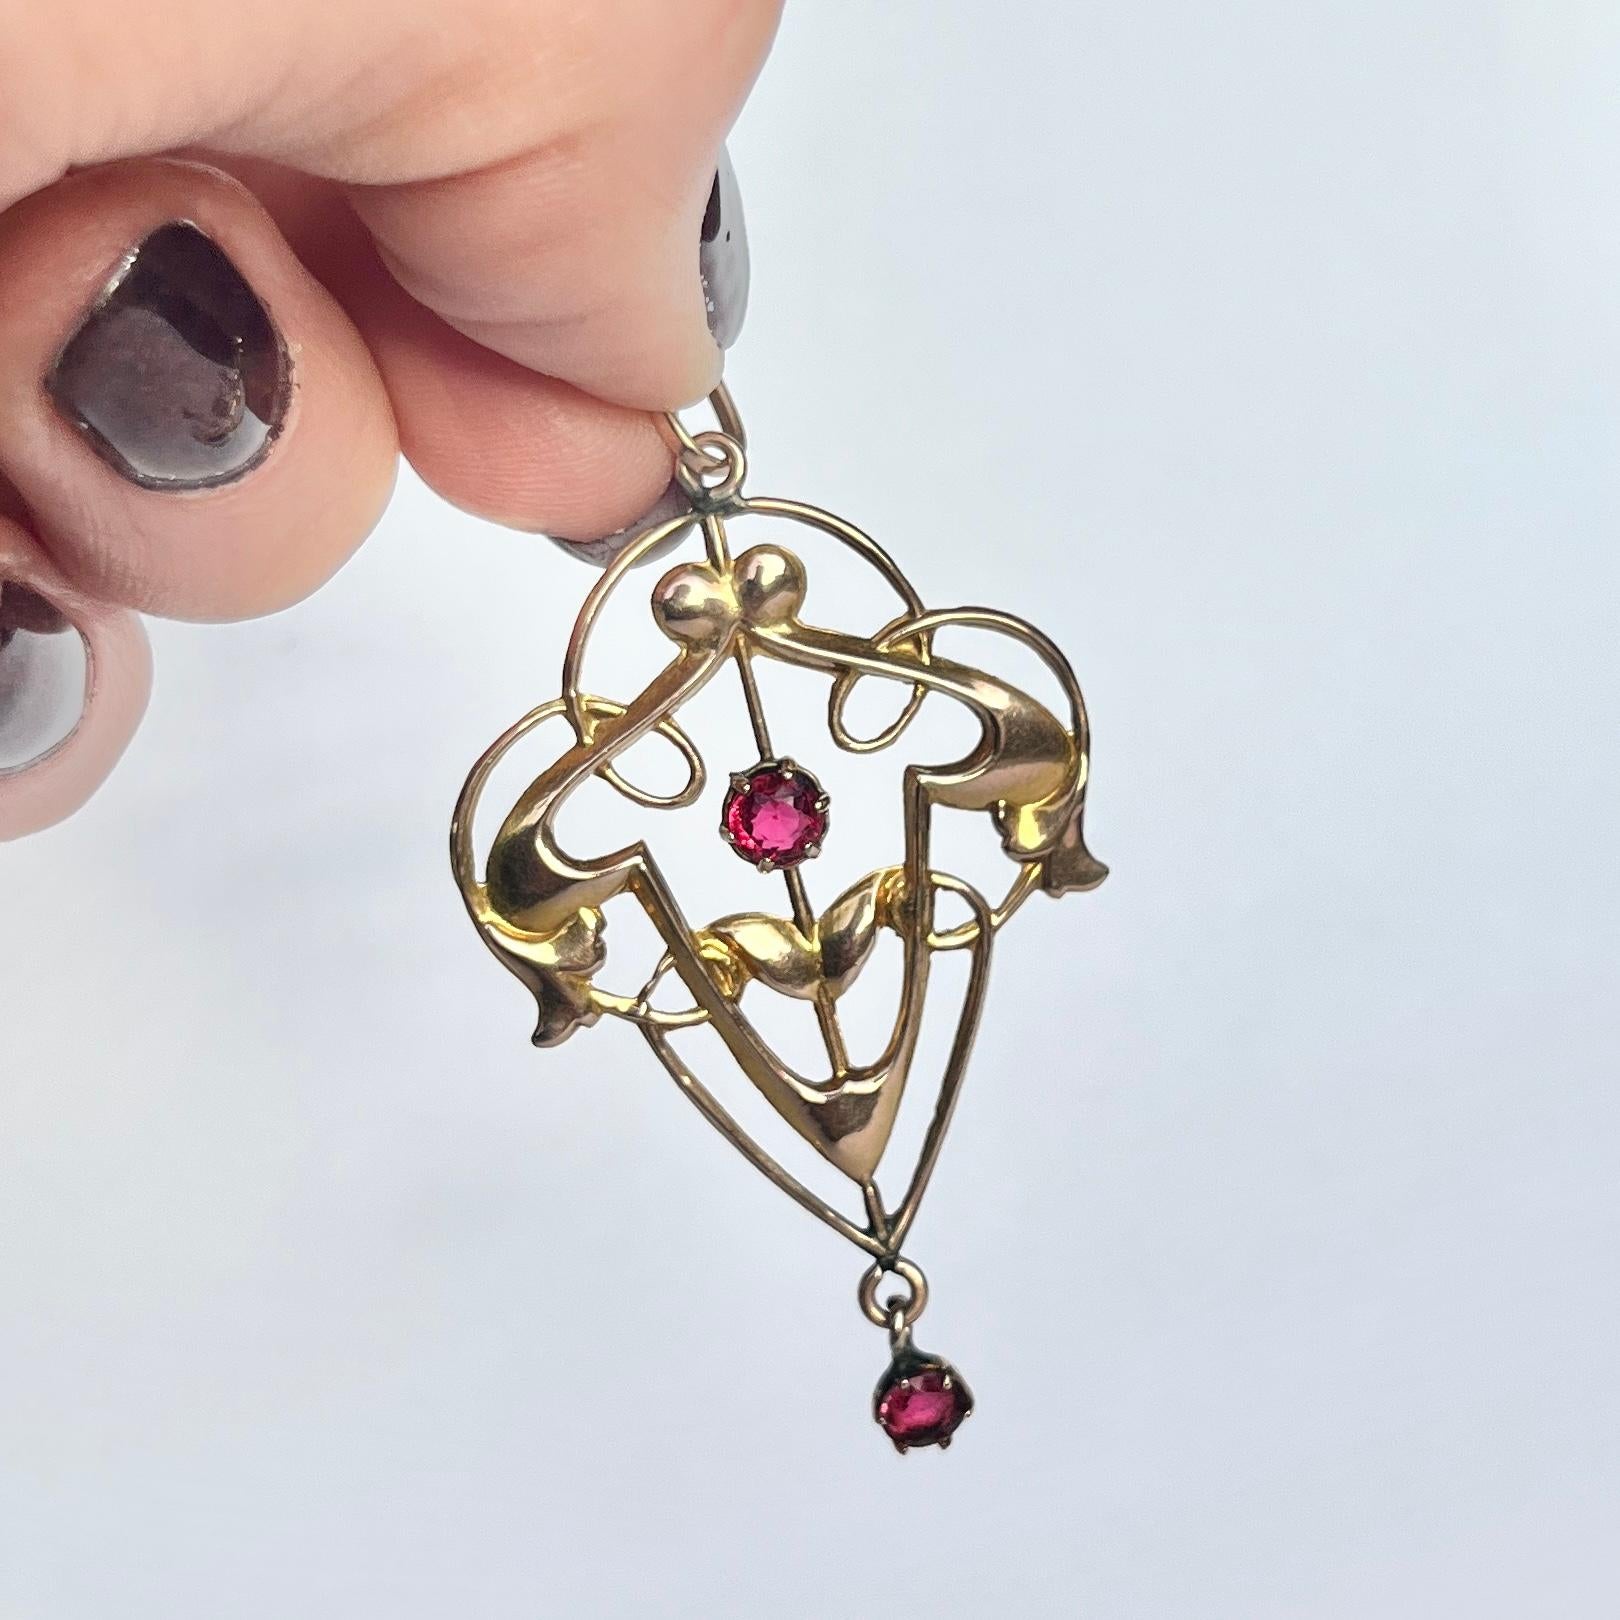 This sweet pendant holds 2 garnet stones and surrounding it is the most ornate gold work. central garnet diameter 5mm. Modelled in 9ct gold.

Drop from loop: 55mm
Pendant Diameter: 30mm

Weight: 1.9g